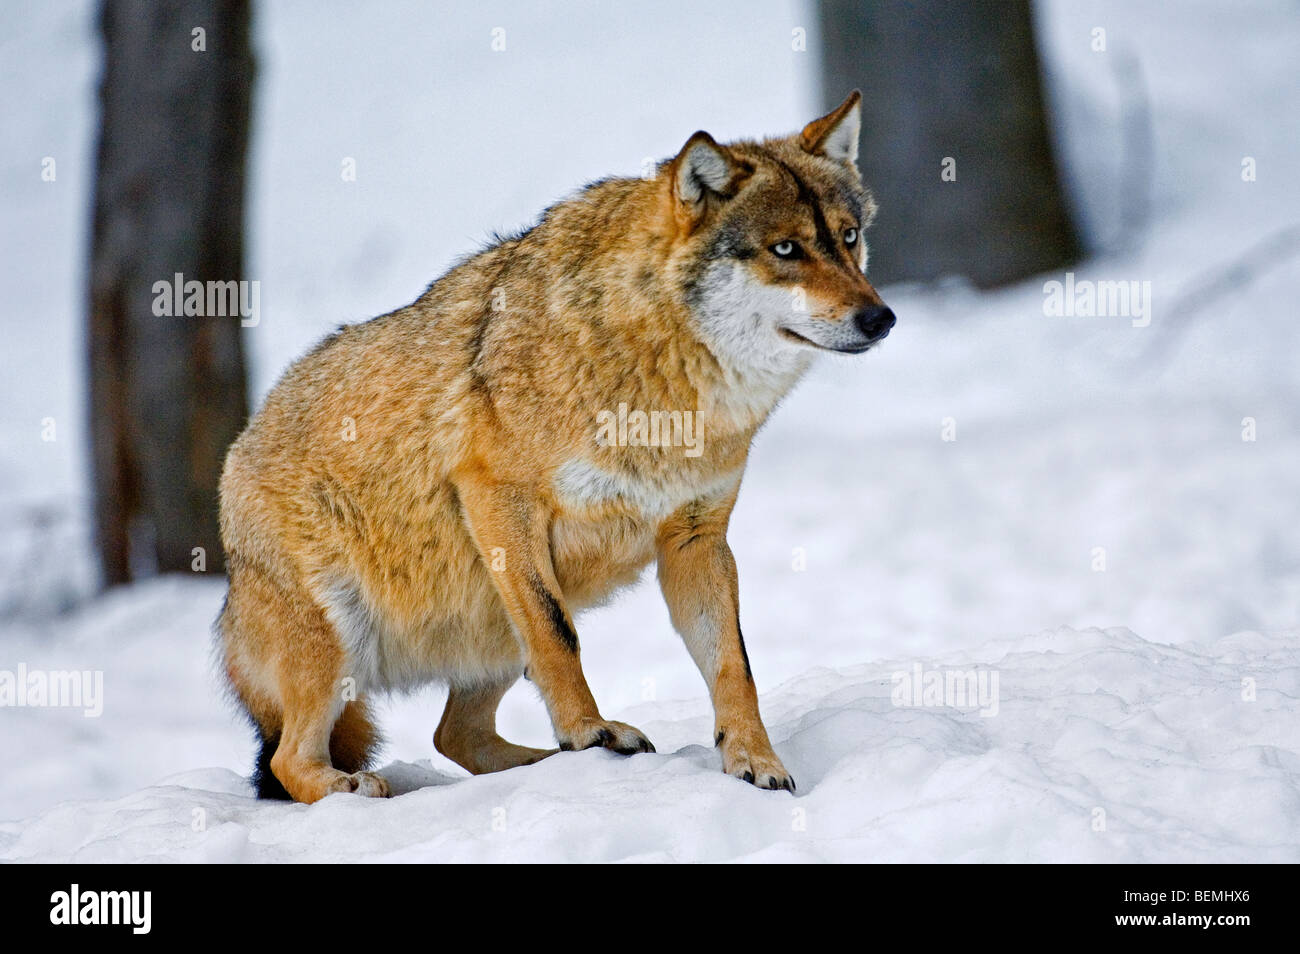 Scared submissive European wolf (Canis lupus) with tail tucked between the legs in the snow in winter, Bavarian Forest, Germany Stock Photo